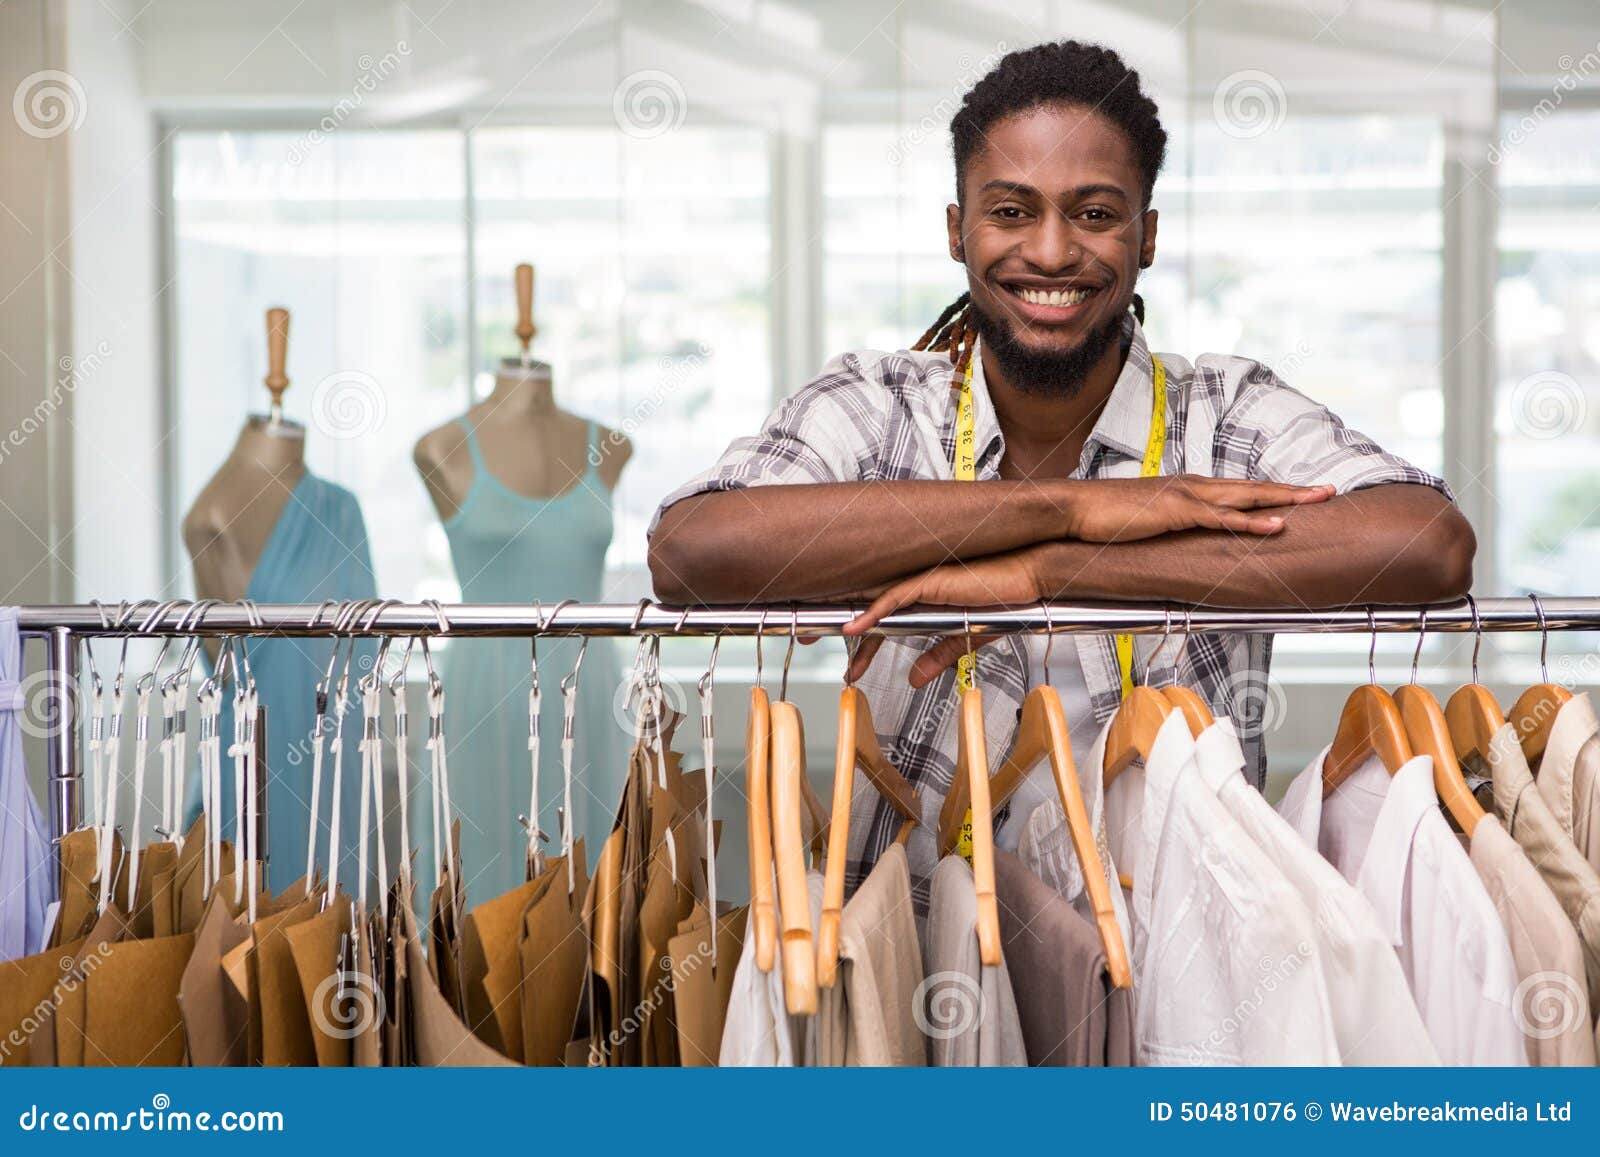 Male Fashion Designer Leaning on Rack of Clothes Stock Photo - Image of ...